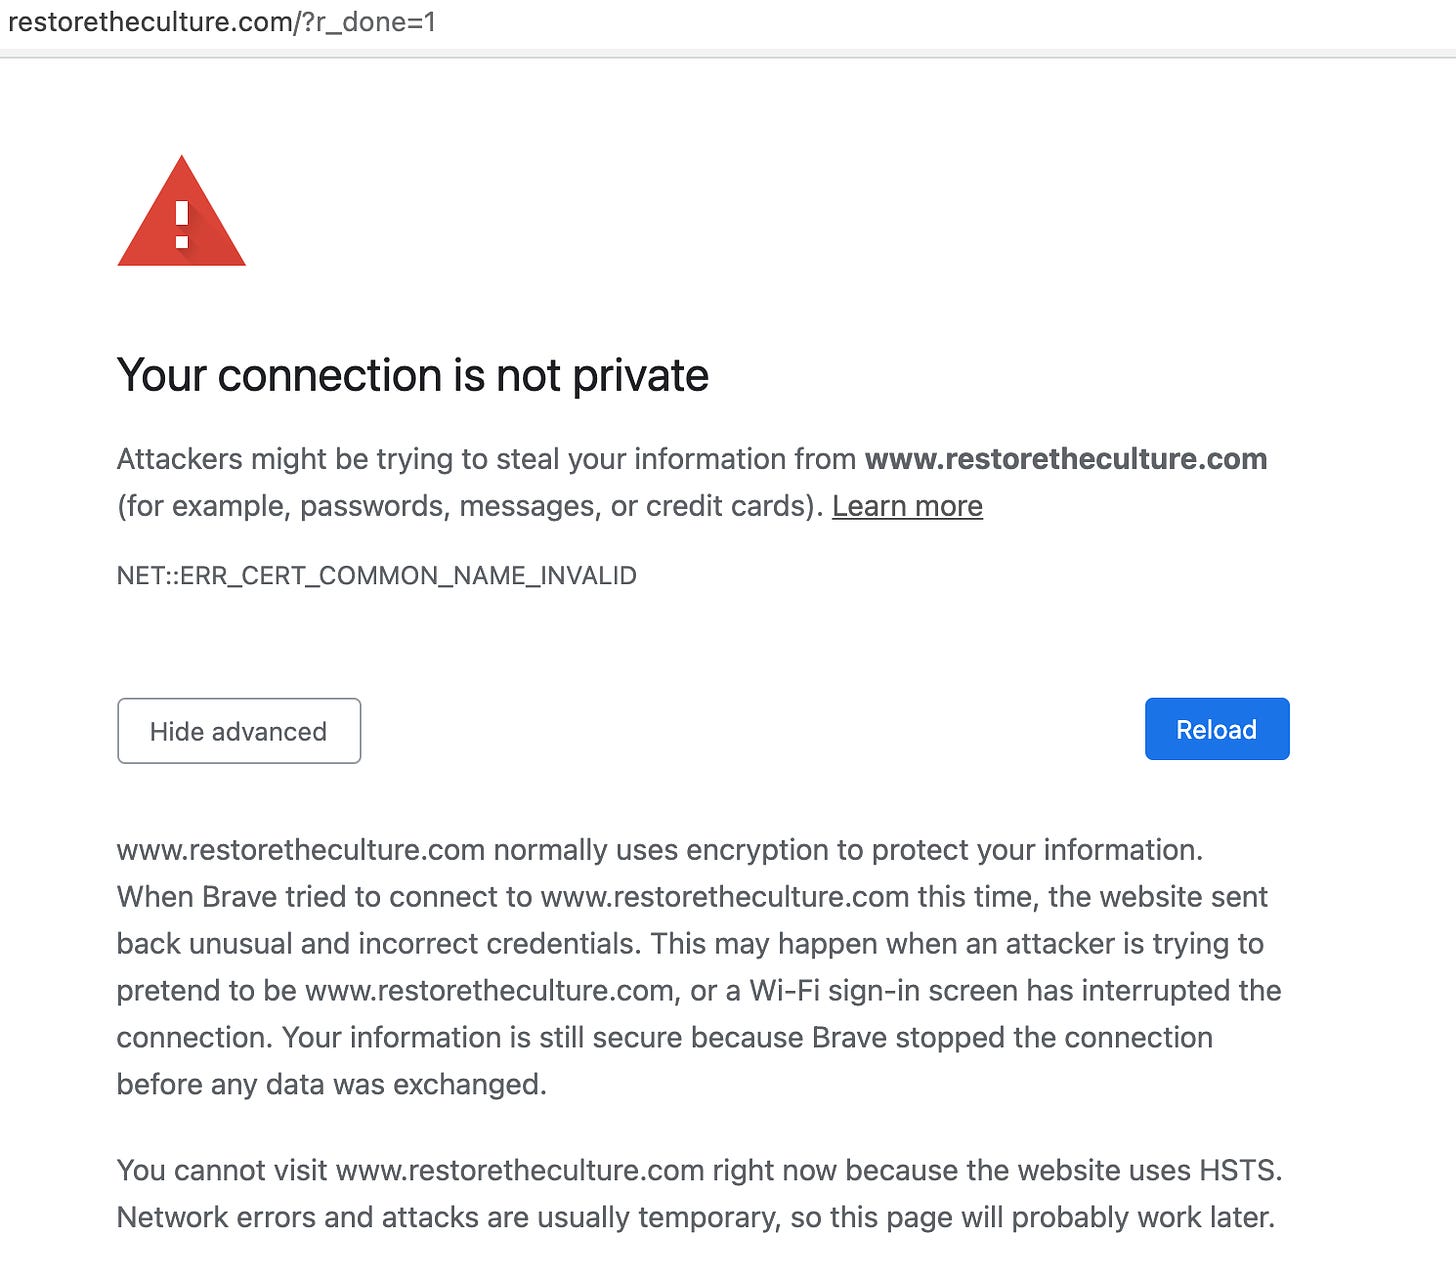 https://restoretheculture.com is under coordinated internet attack as of 8:40 p.m. CDT on May 2, 2021